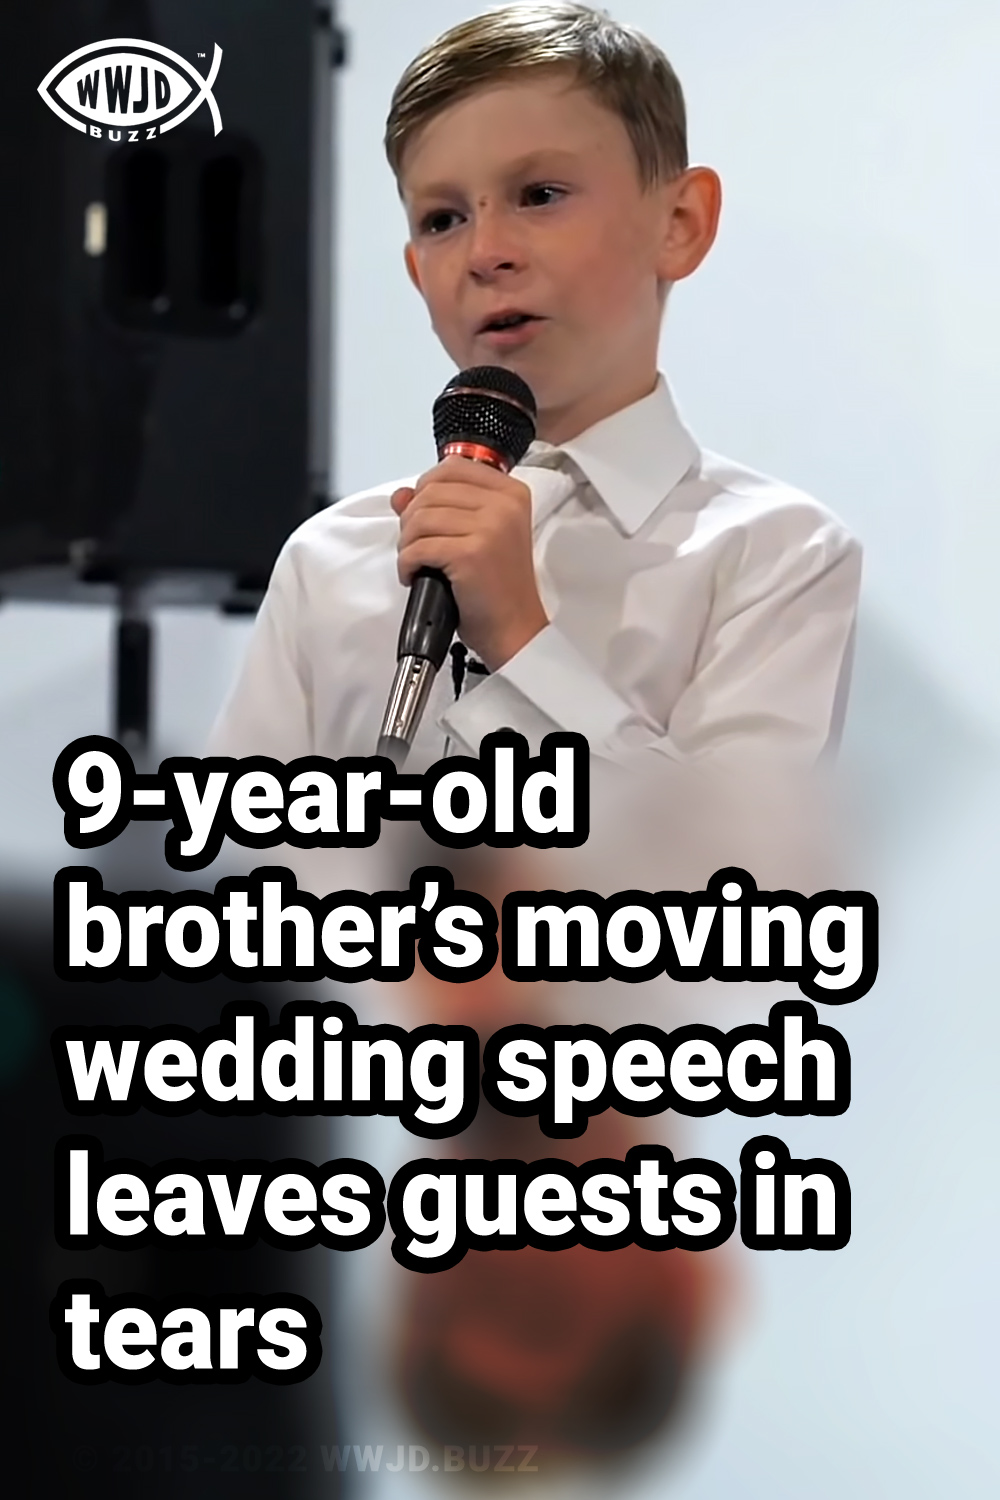 9-year-old brother’s moving wedding speech leaves guests in tears